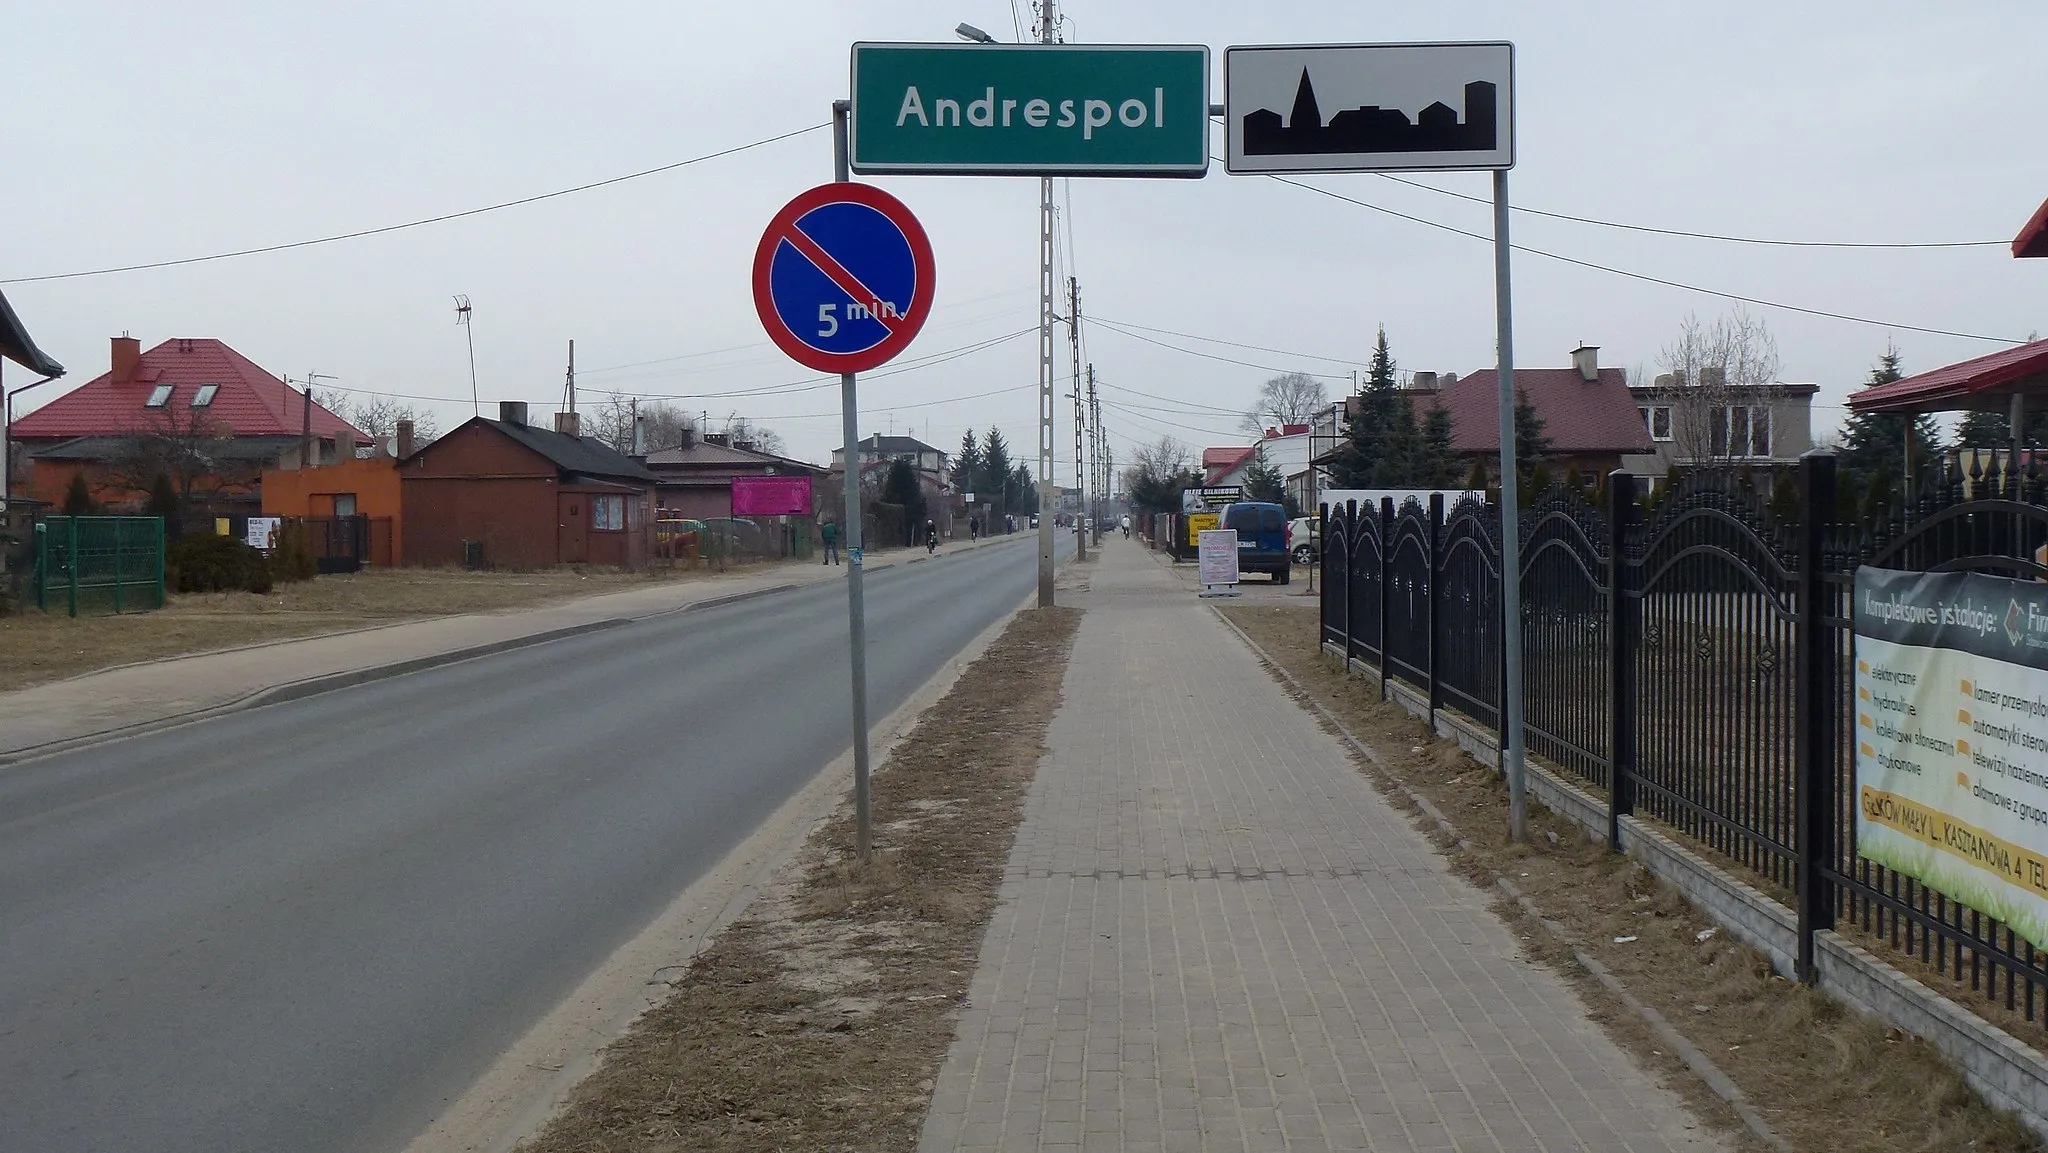 Image of Andrespol